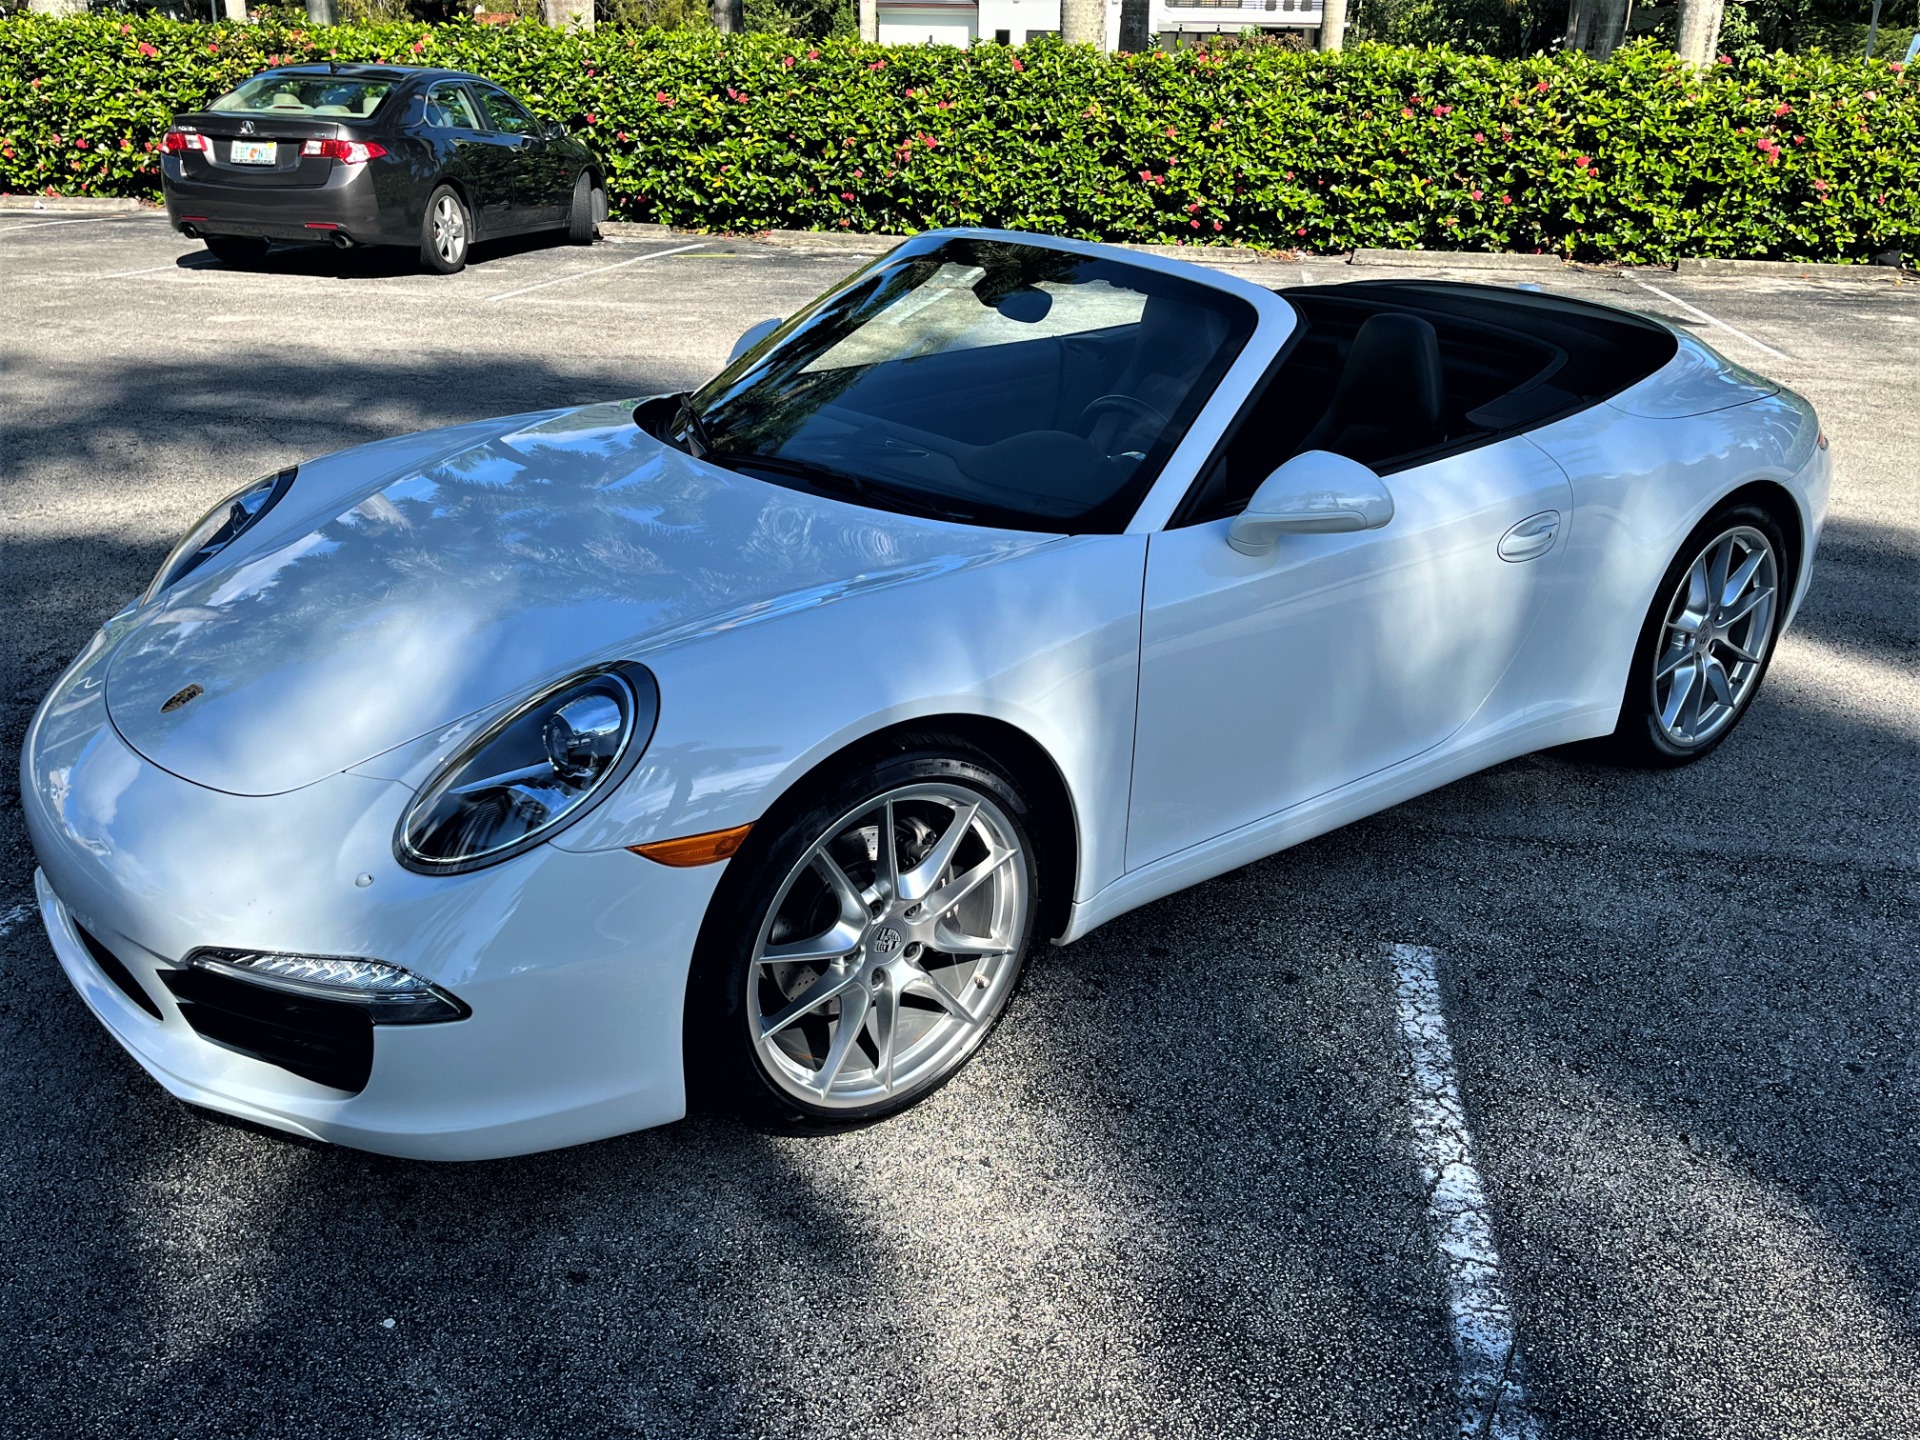 Used 2014 Porsche 911 Carrera for sale Sold at The Gables Sports Cars in Miami FL 33146 4